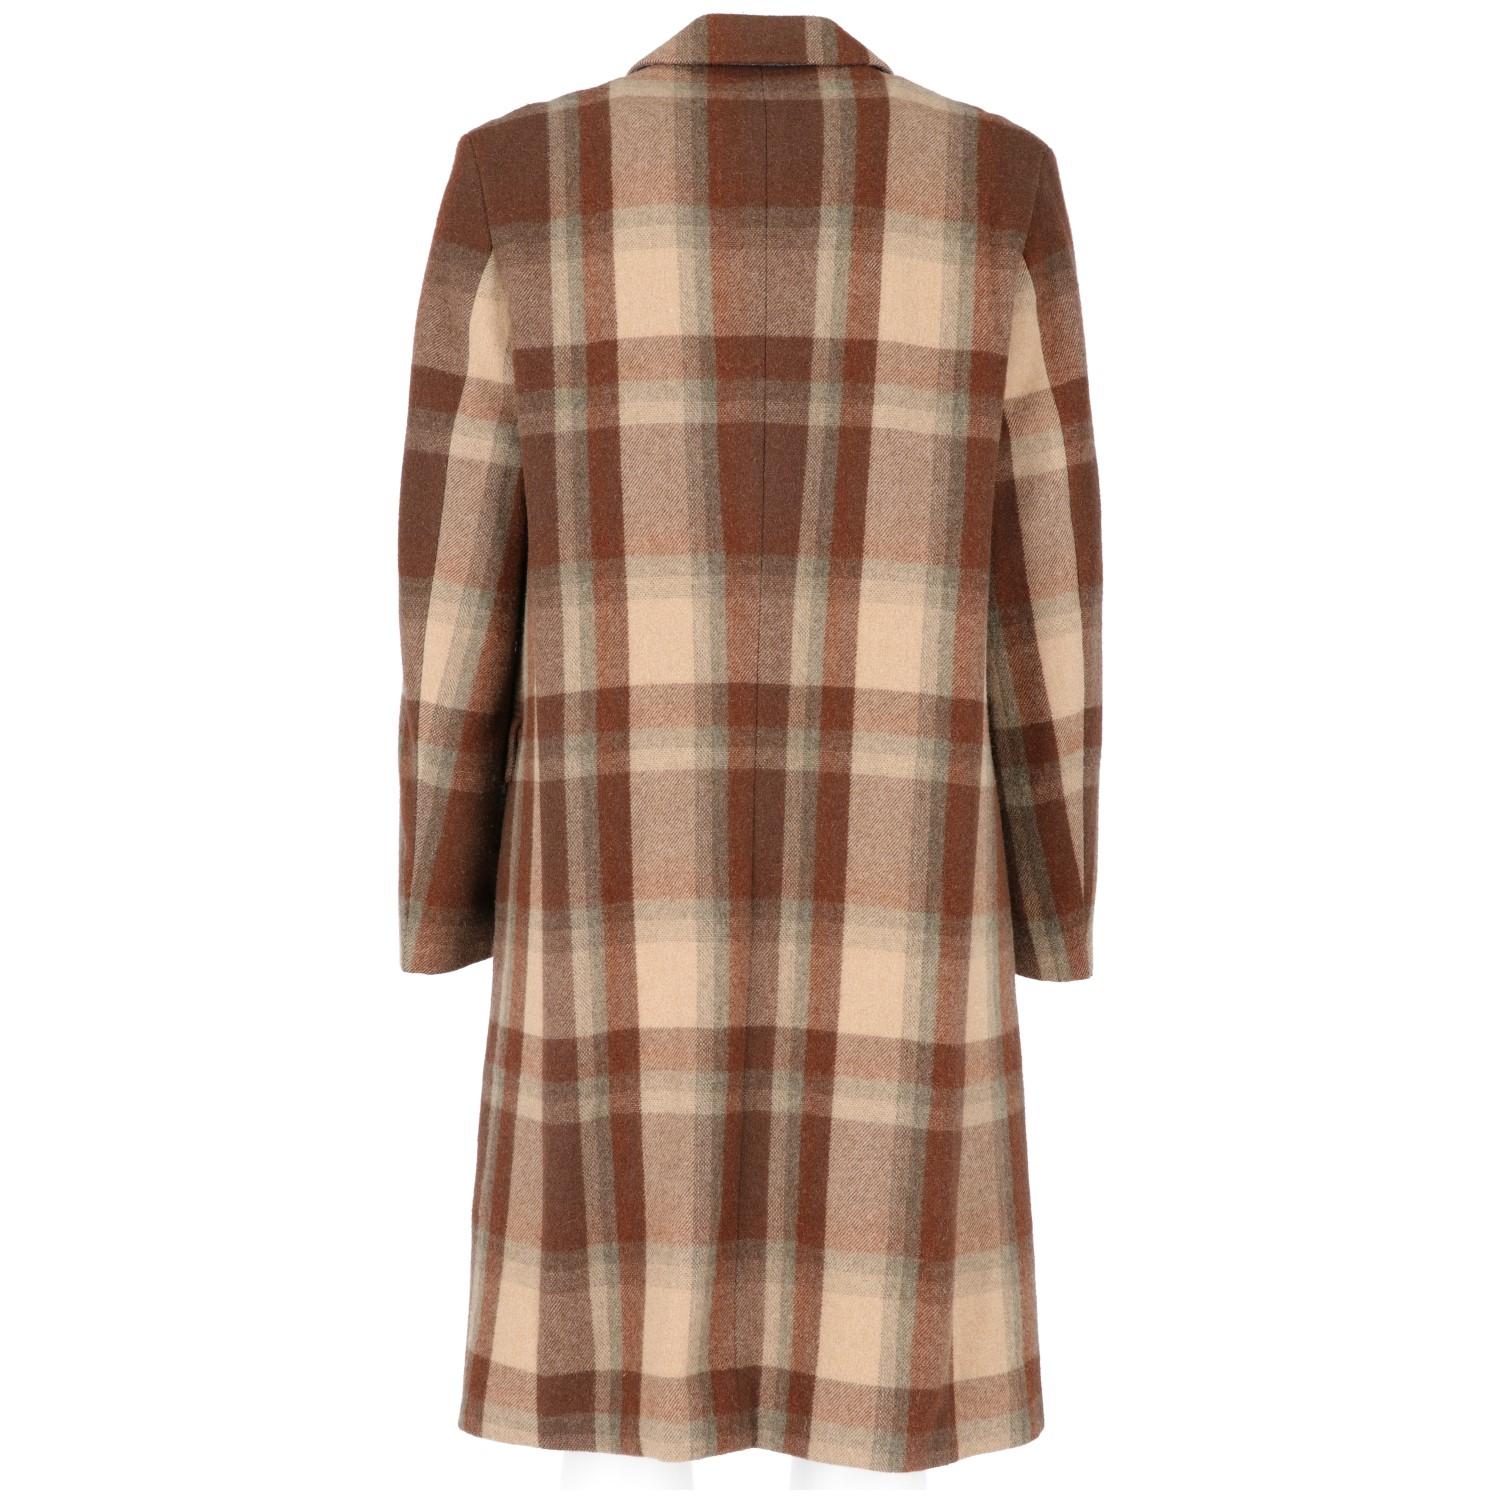 Hugo Boss wool coat for men in brown beige and green tartan colors. Featuring a single-breast buttoned fastening, one oblique little pocket close to left chest and two pockets with flap outer. One applied pocket and one with zip inner the lining.